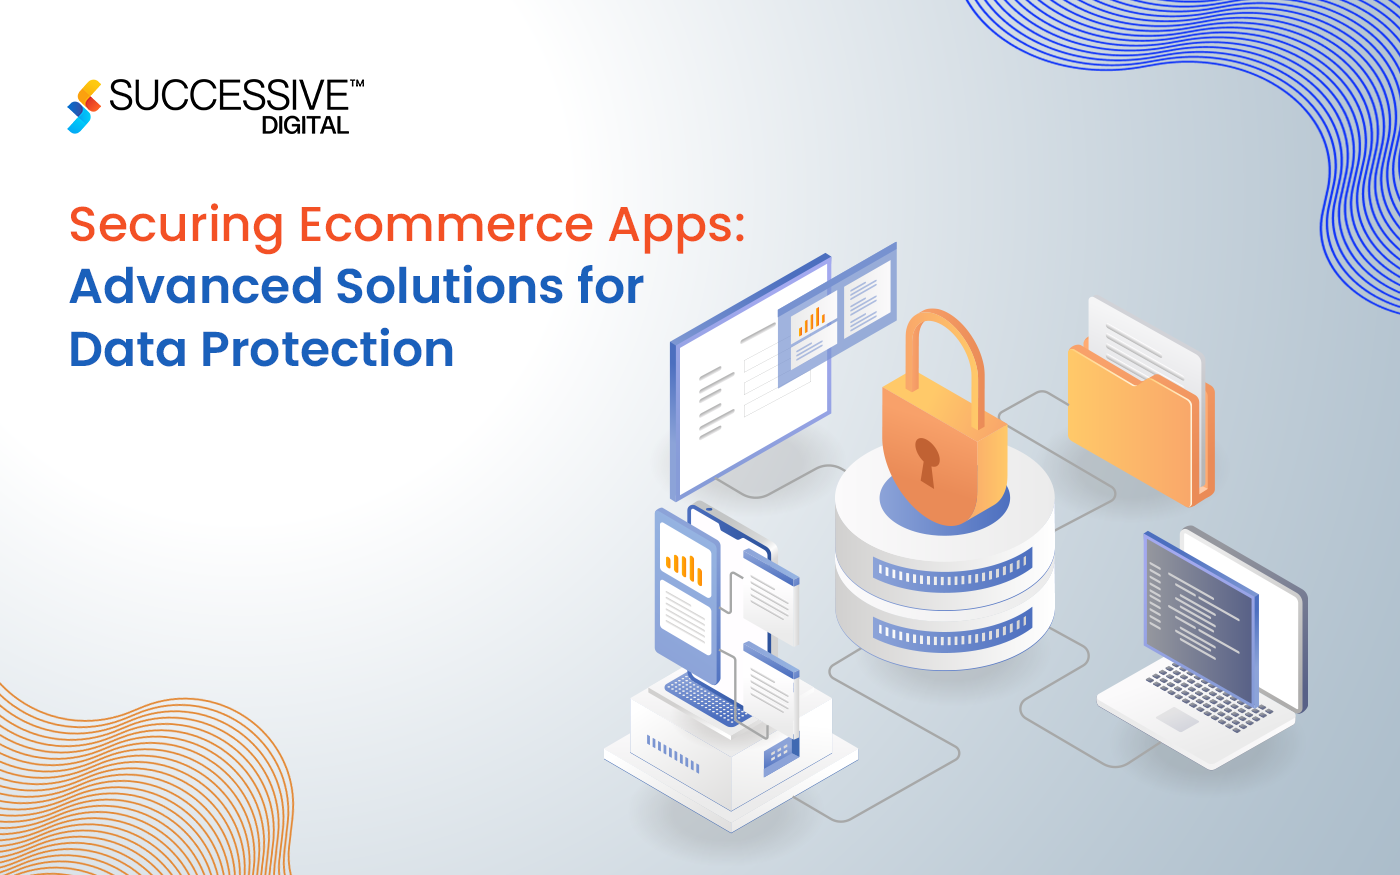 Securing Ecommerce Apps: Advanced Solutions for Data Protection